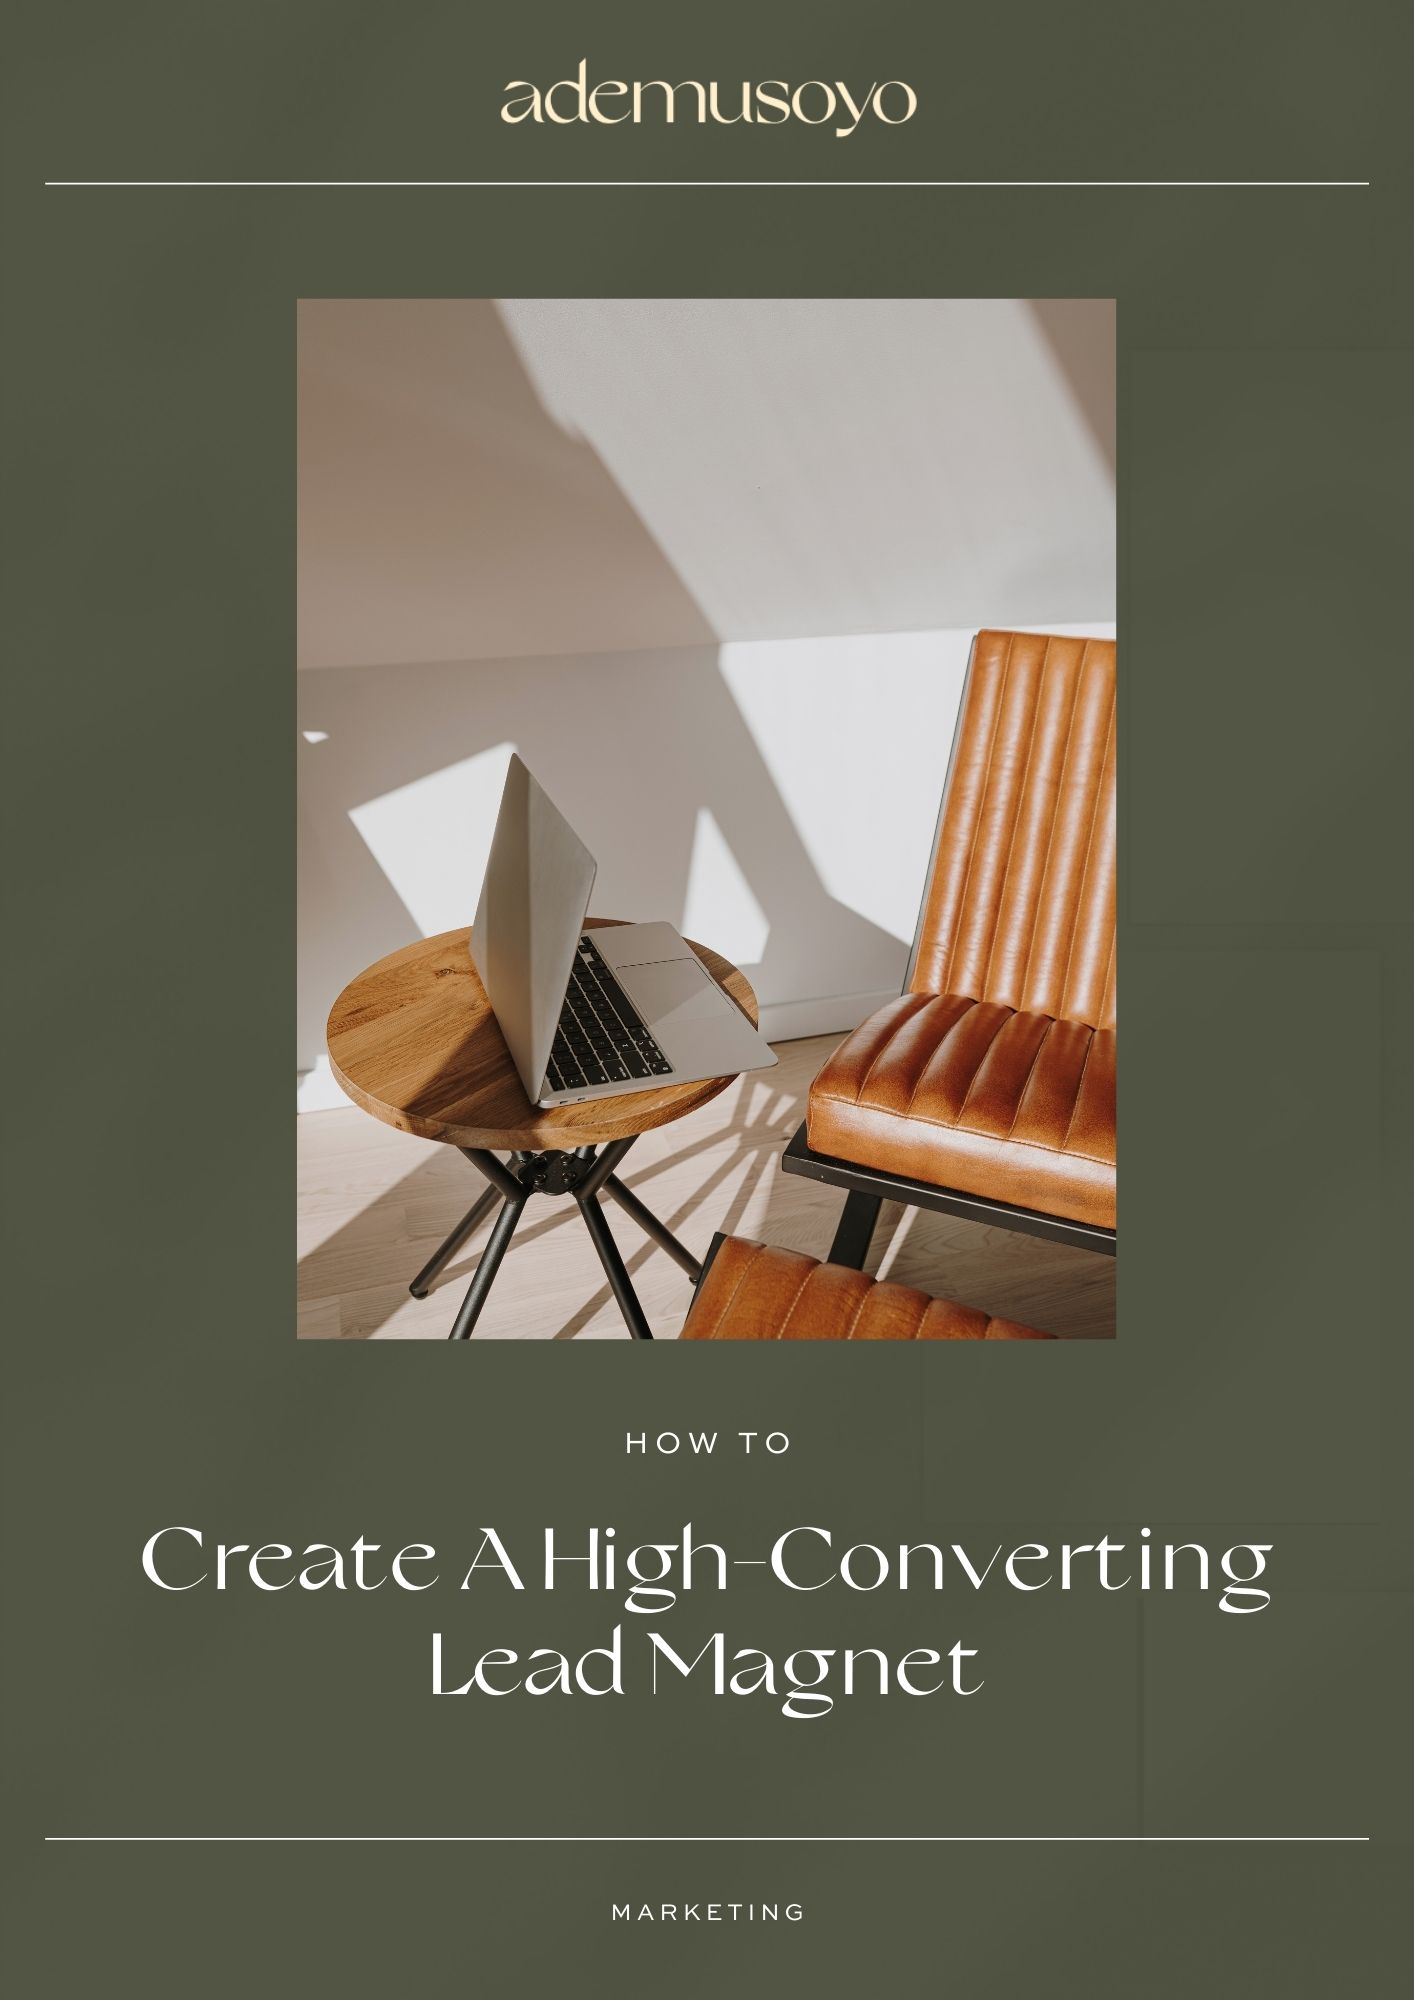 How To Create A High-Converting Lead Magnet